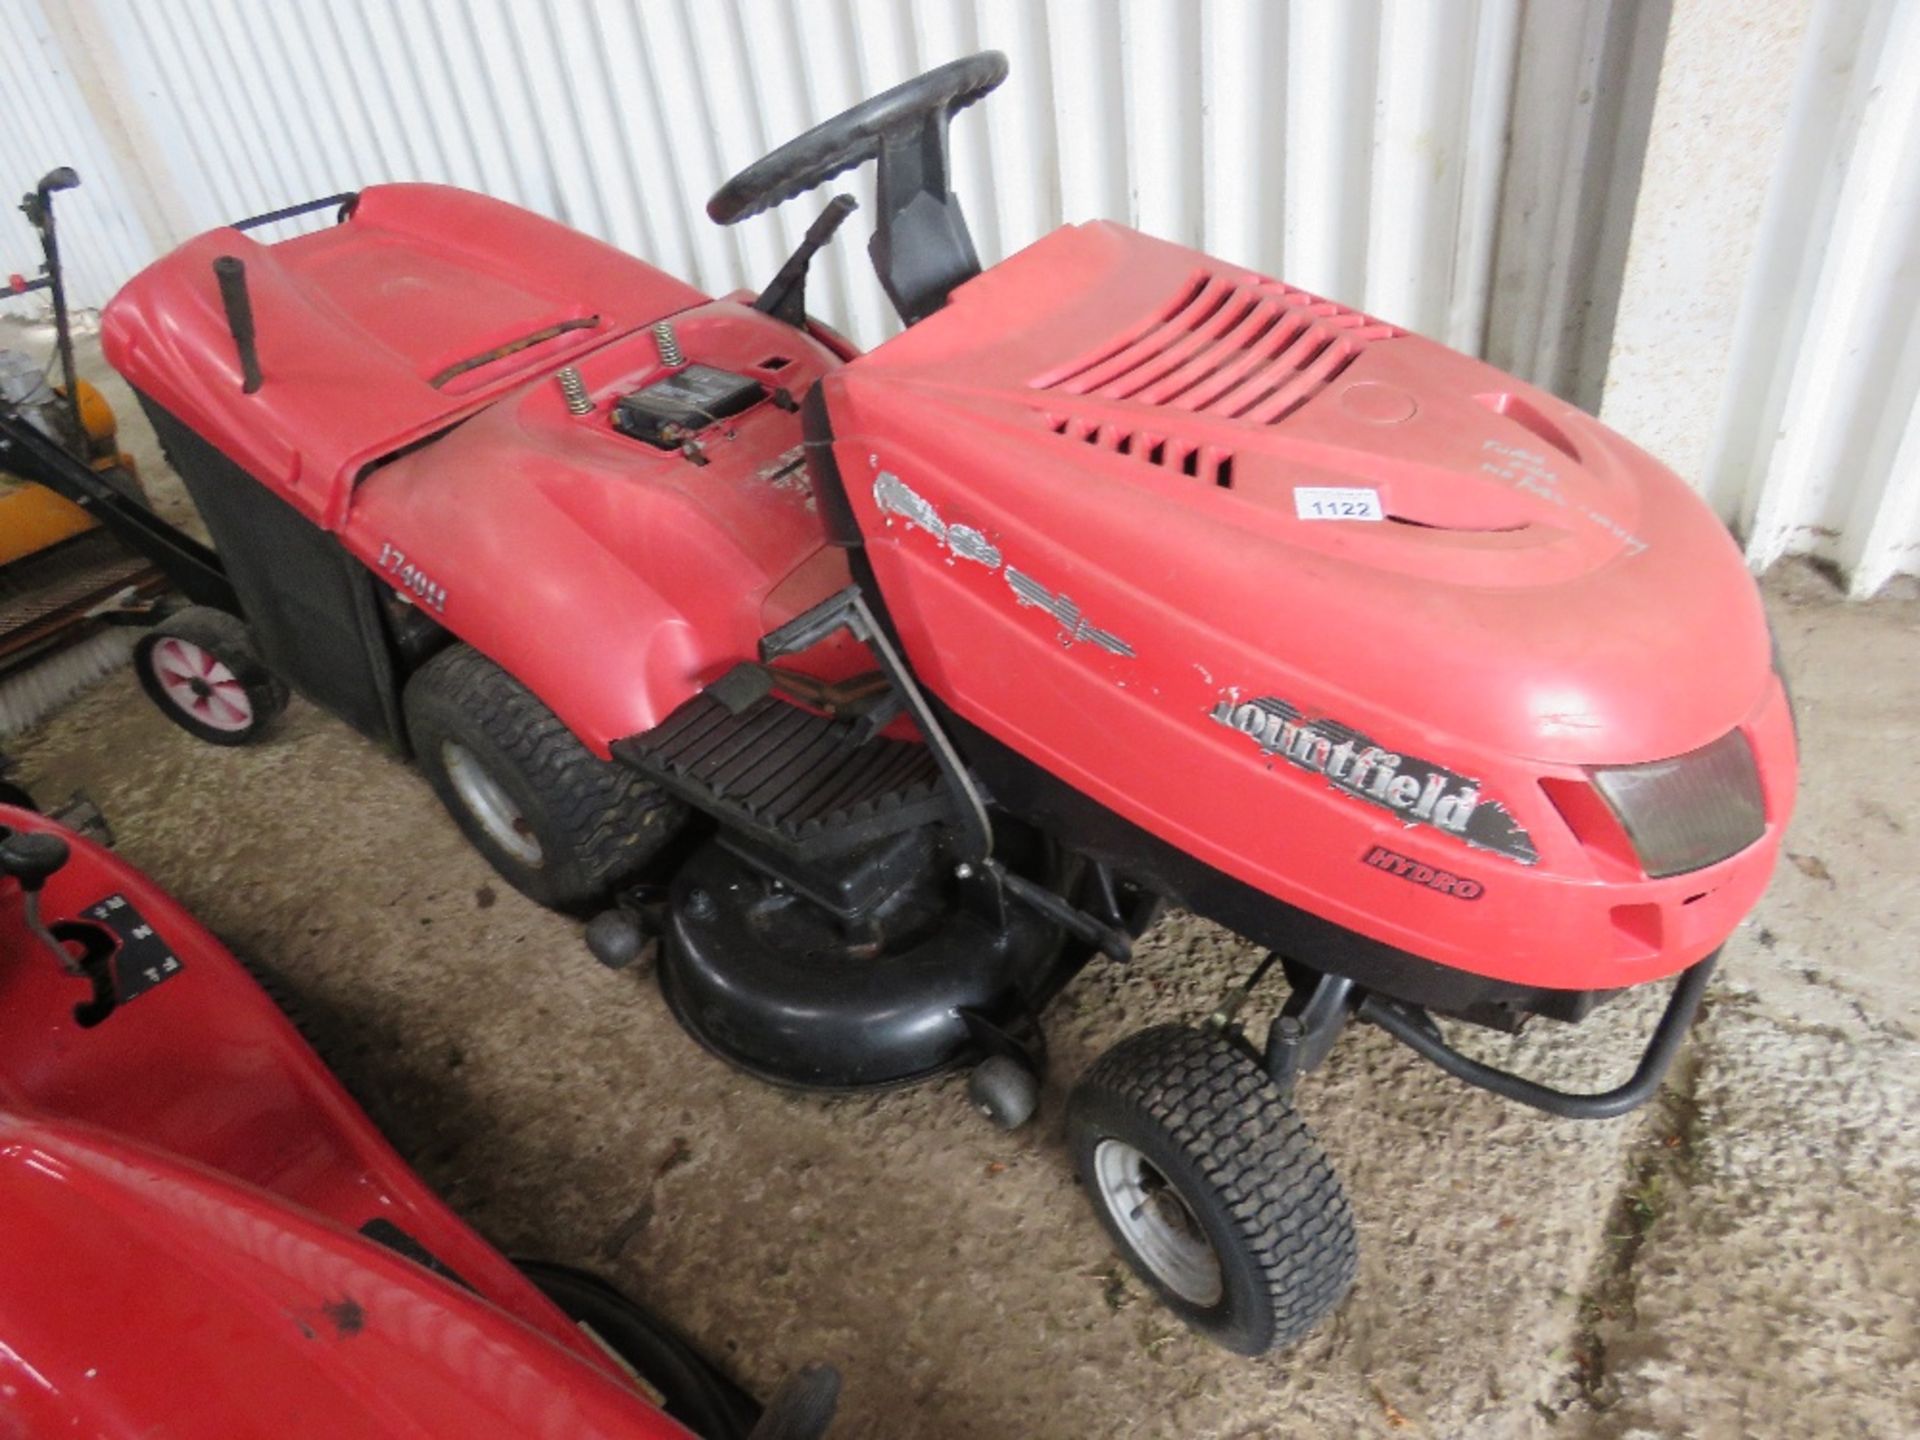 MOUNTFIELD 1740H HYDRO RIDE ON MOWER WITH COLLECTOR, NO SEAT....THIS LOT IS SOLD UNDER THE AUCTIONEE